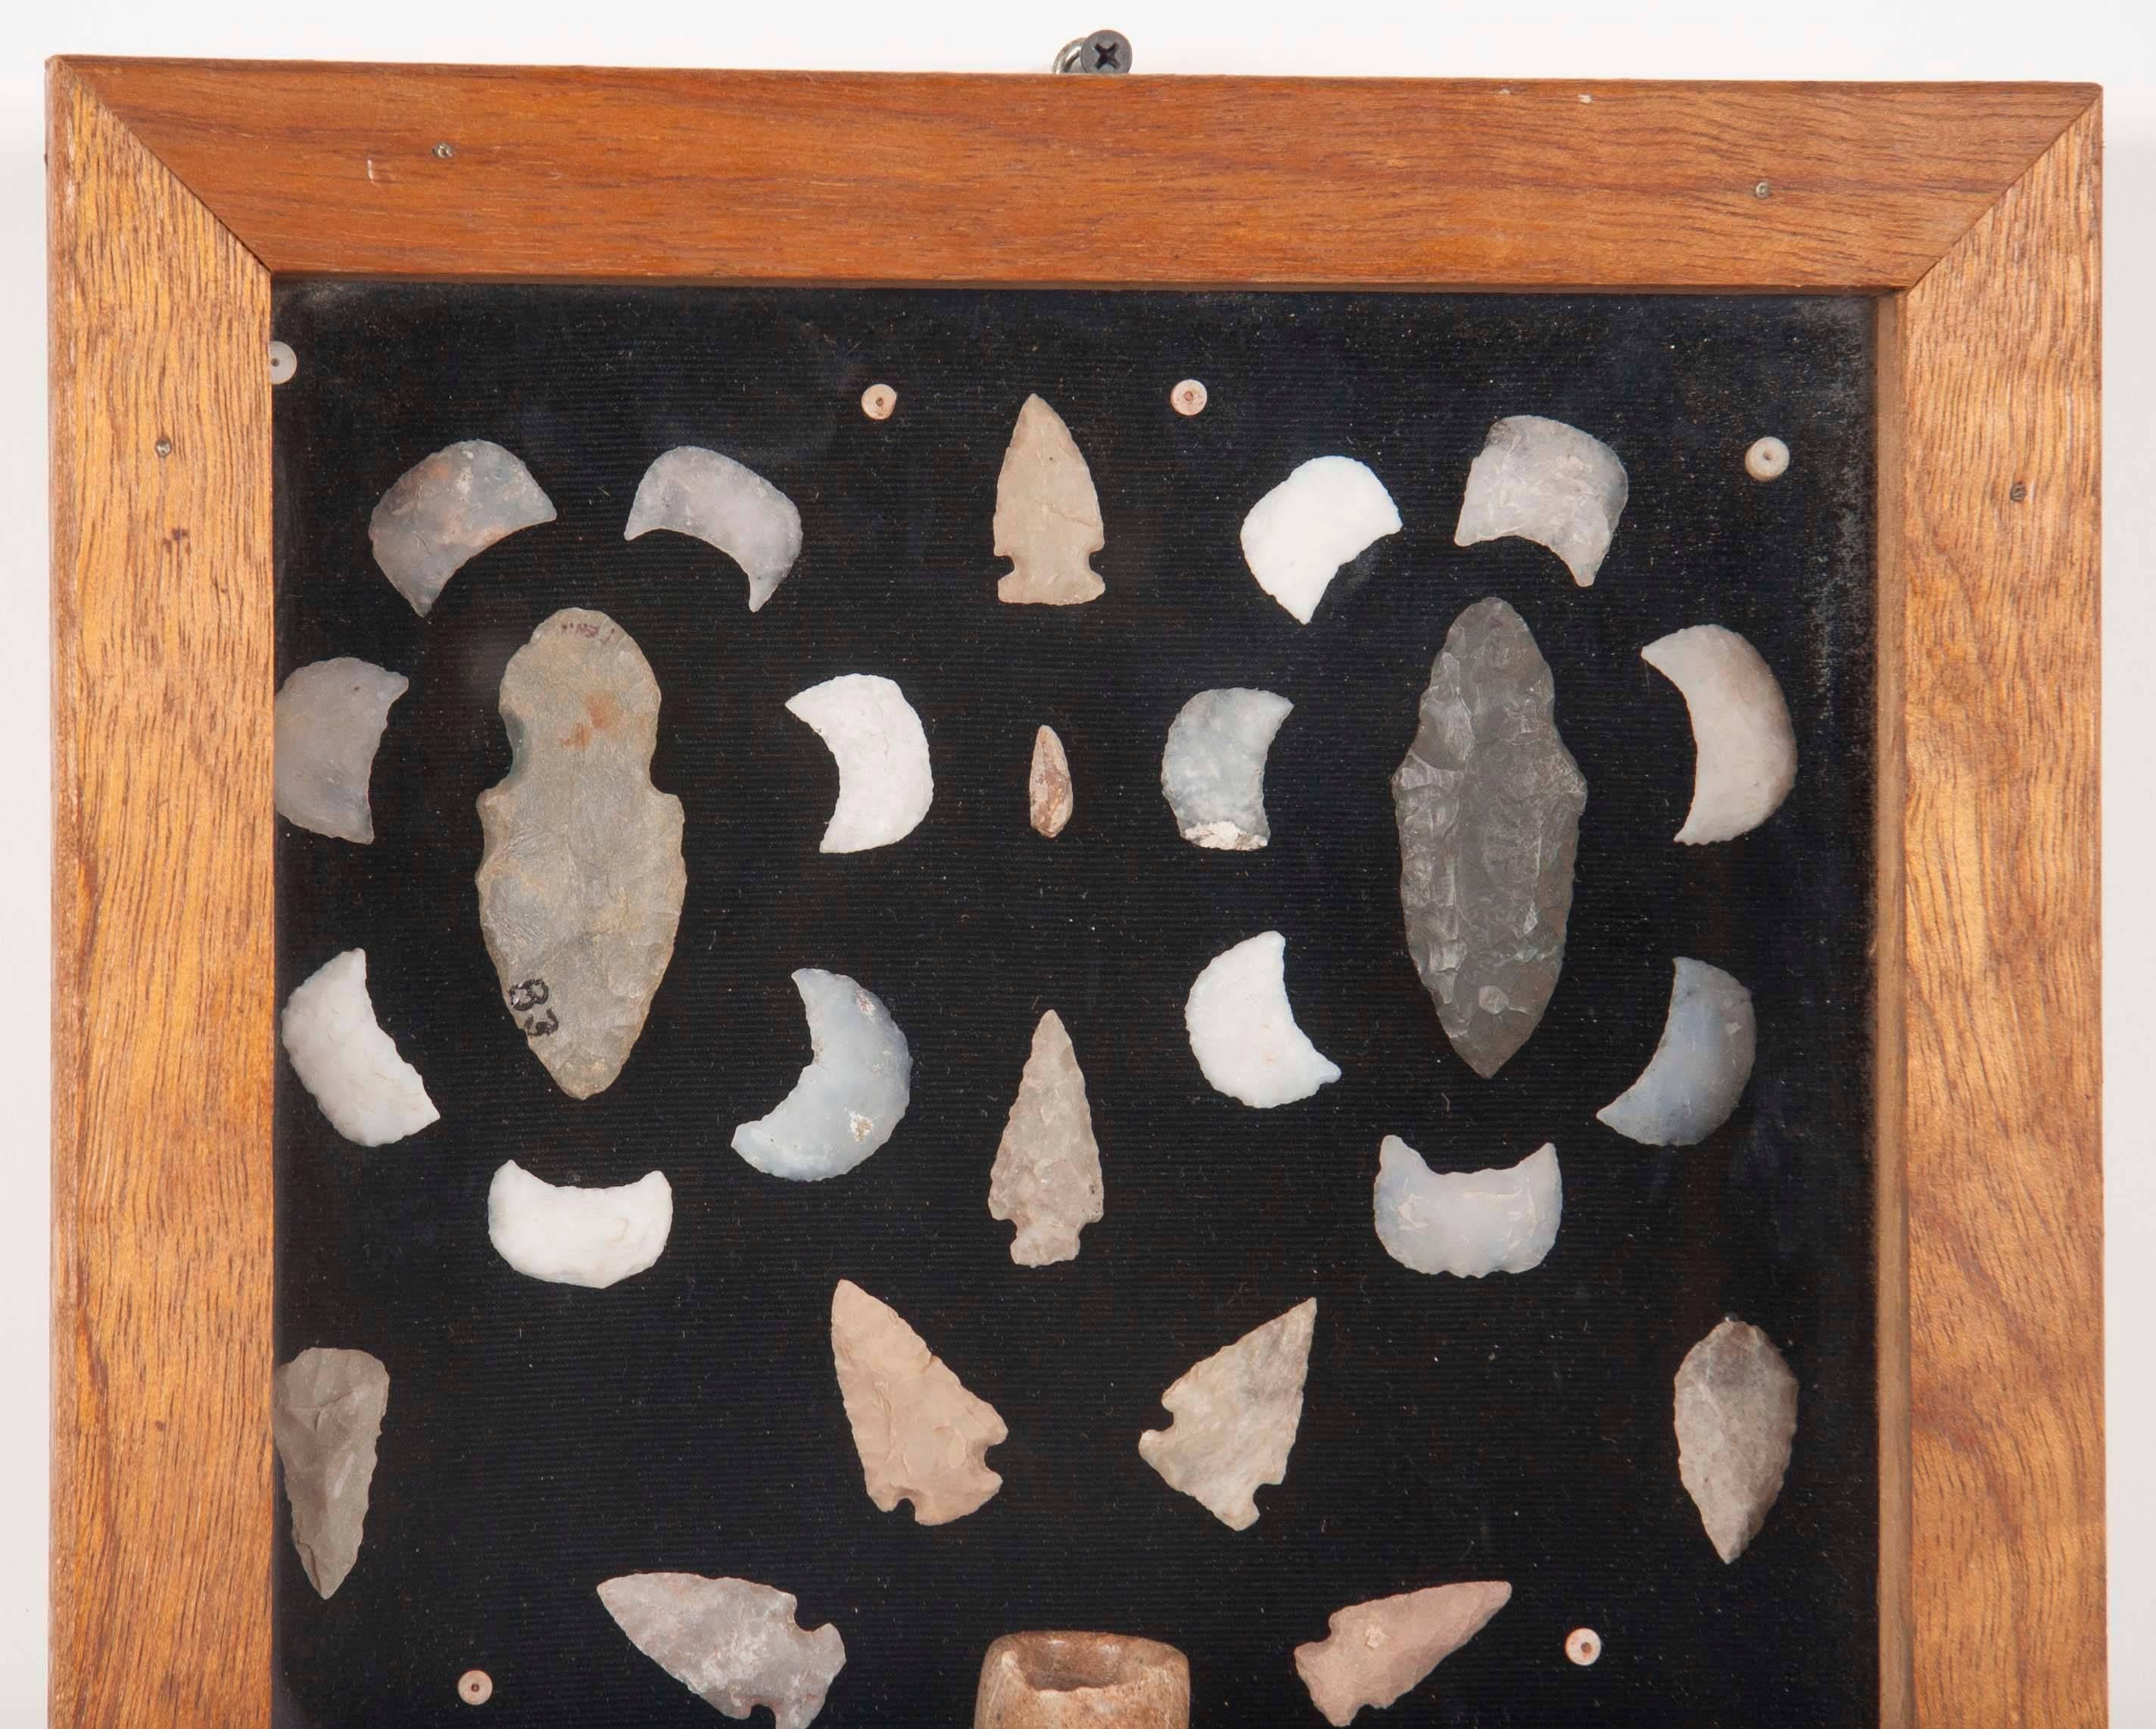 American Indian Arrowhead and Artifact Collection 3